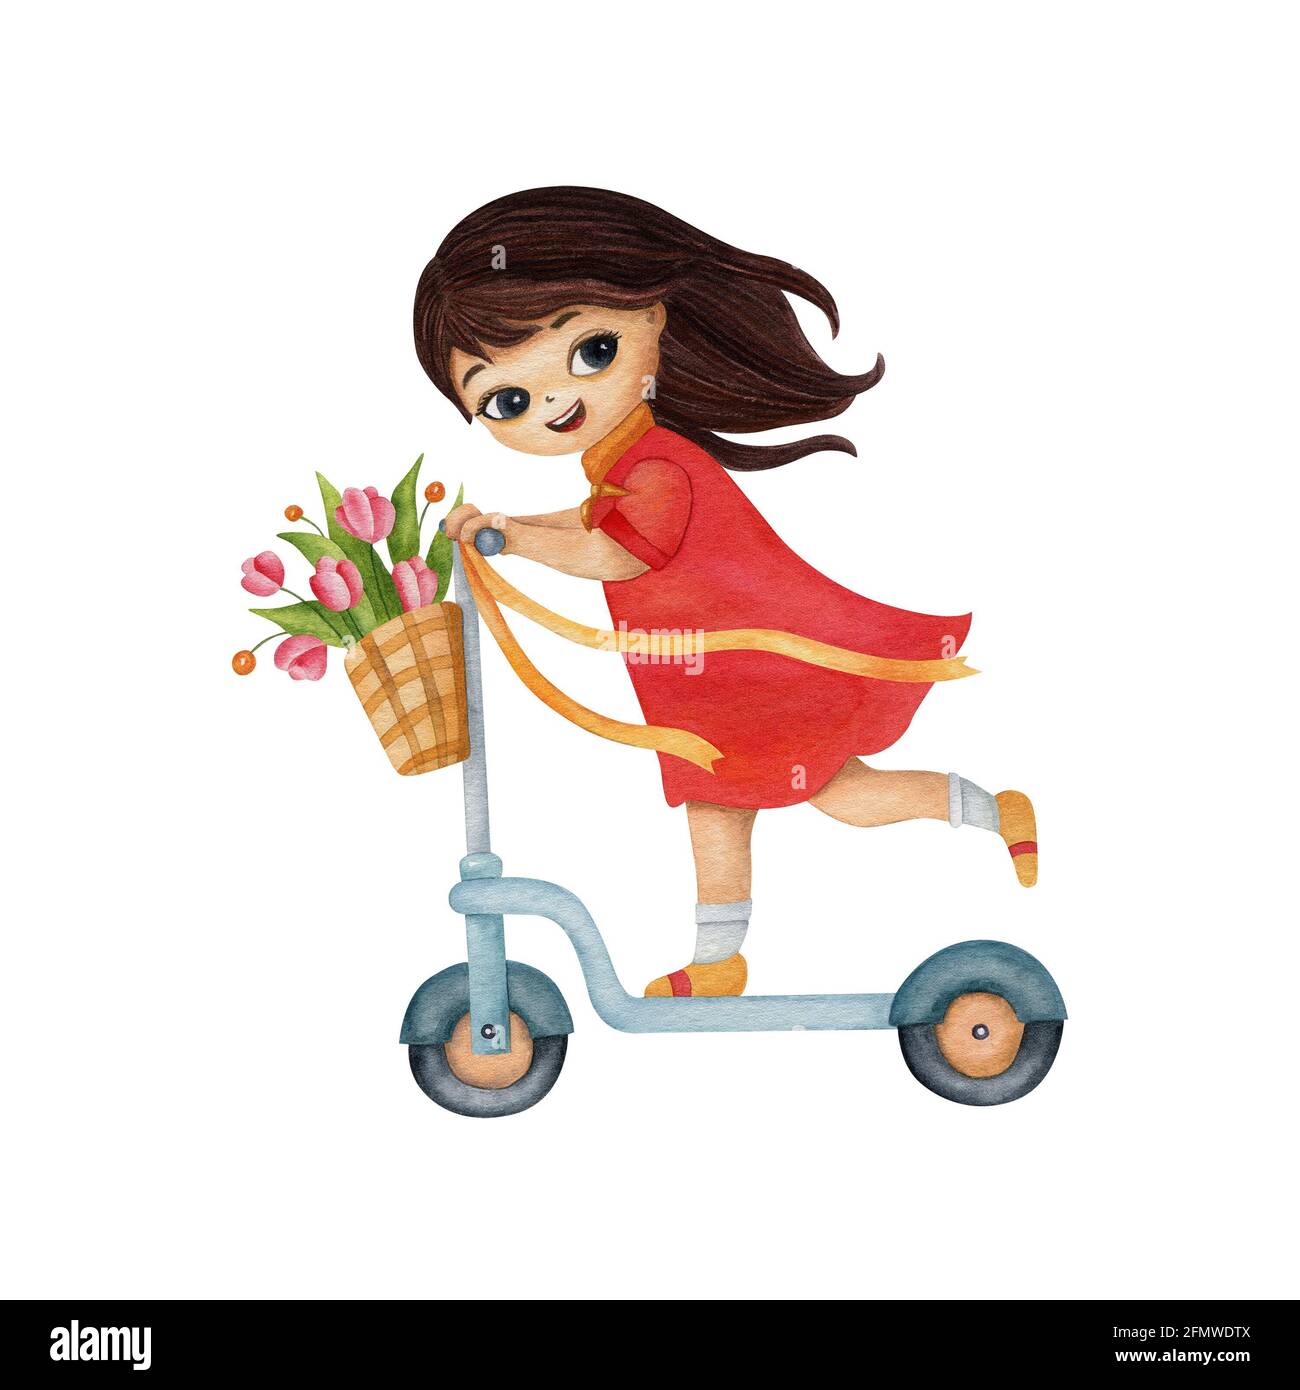 Watercolor illustration of girl in red dress on the scooter. Summer illustration isolated on light background. Stock Photo